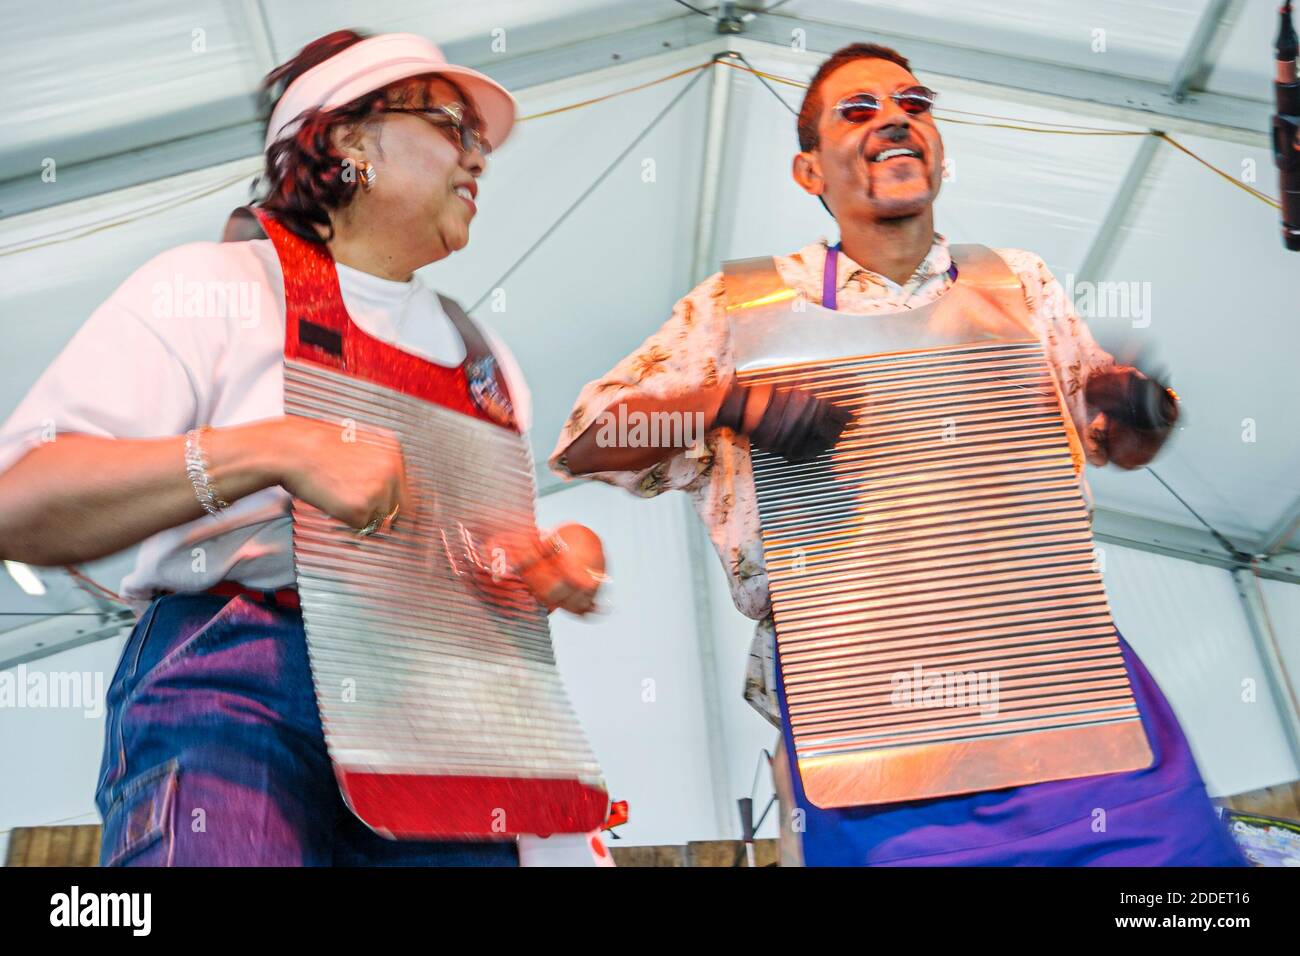 Florida Ft. Fort Lauderdale Cajun Zydeco Crawfish Festival,celebration fair event husband wife washboard frottoir musicians play playing, Stock Photo